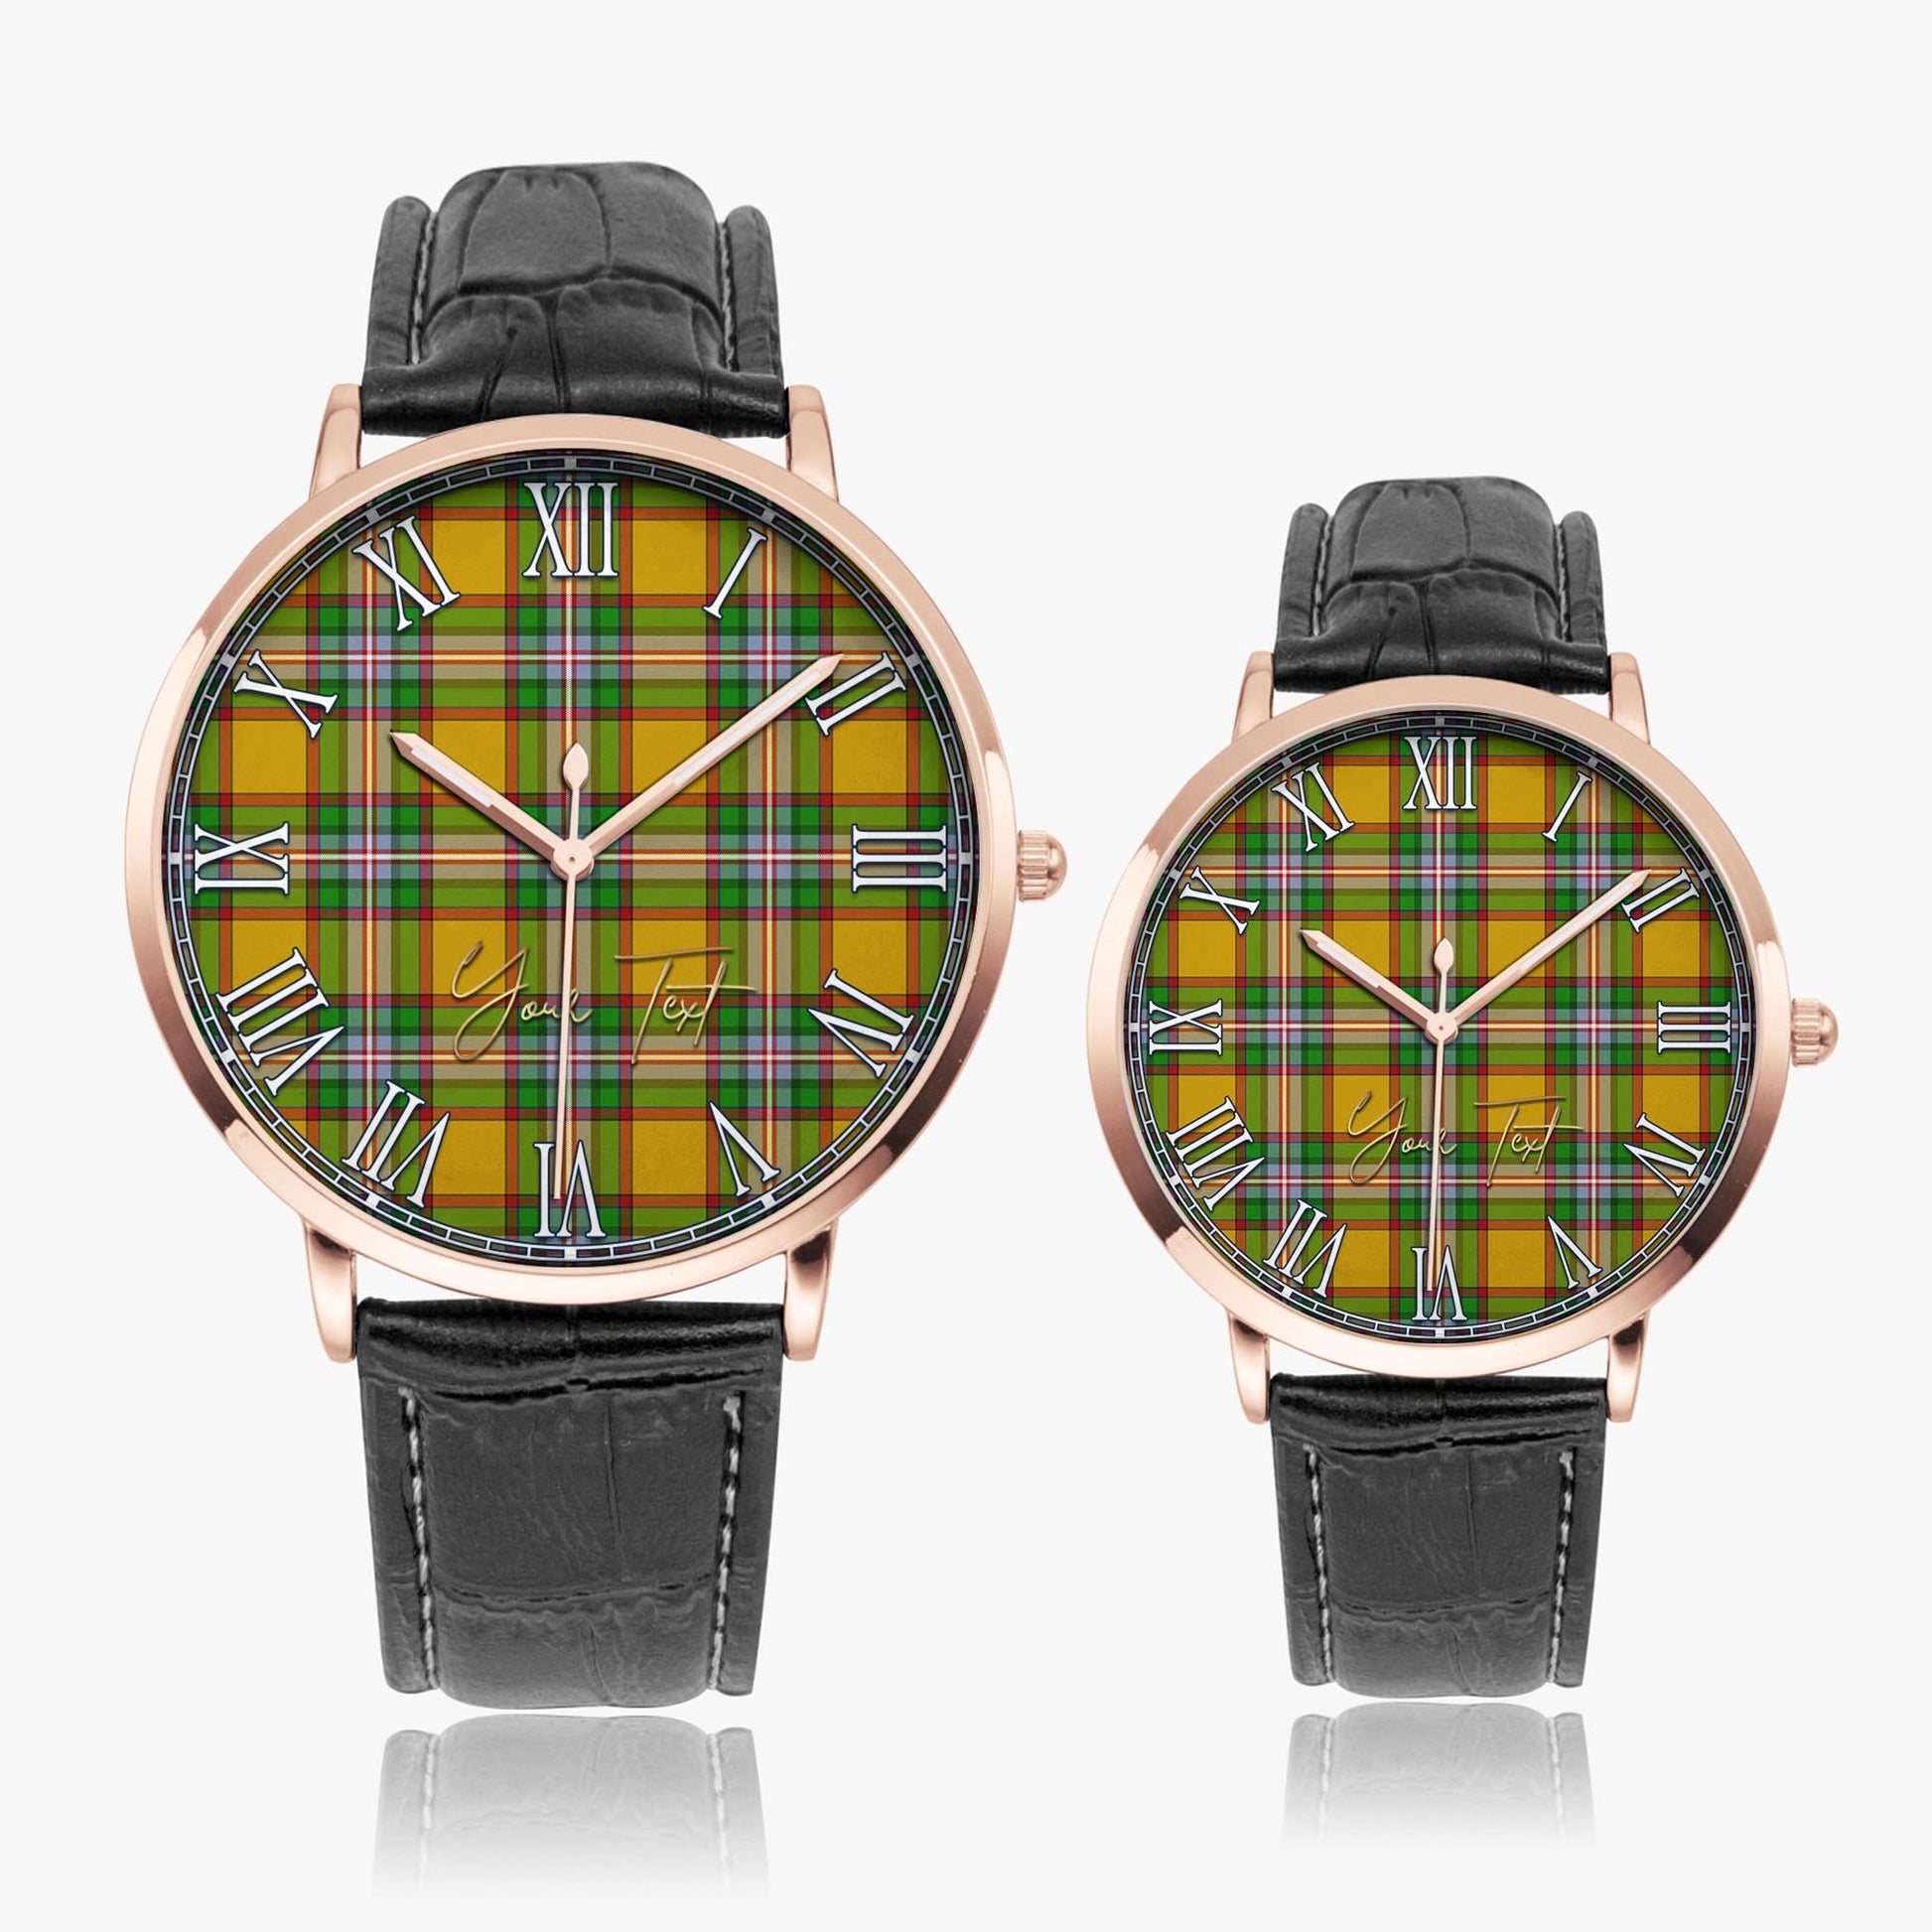 Essex County Canada Tartan Personalized Your Text Leather Trap Quartz Watch Ultra Thin Rose Gold Case With Black Leather Strap - Tartanvibesclothing